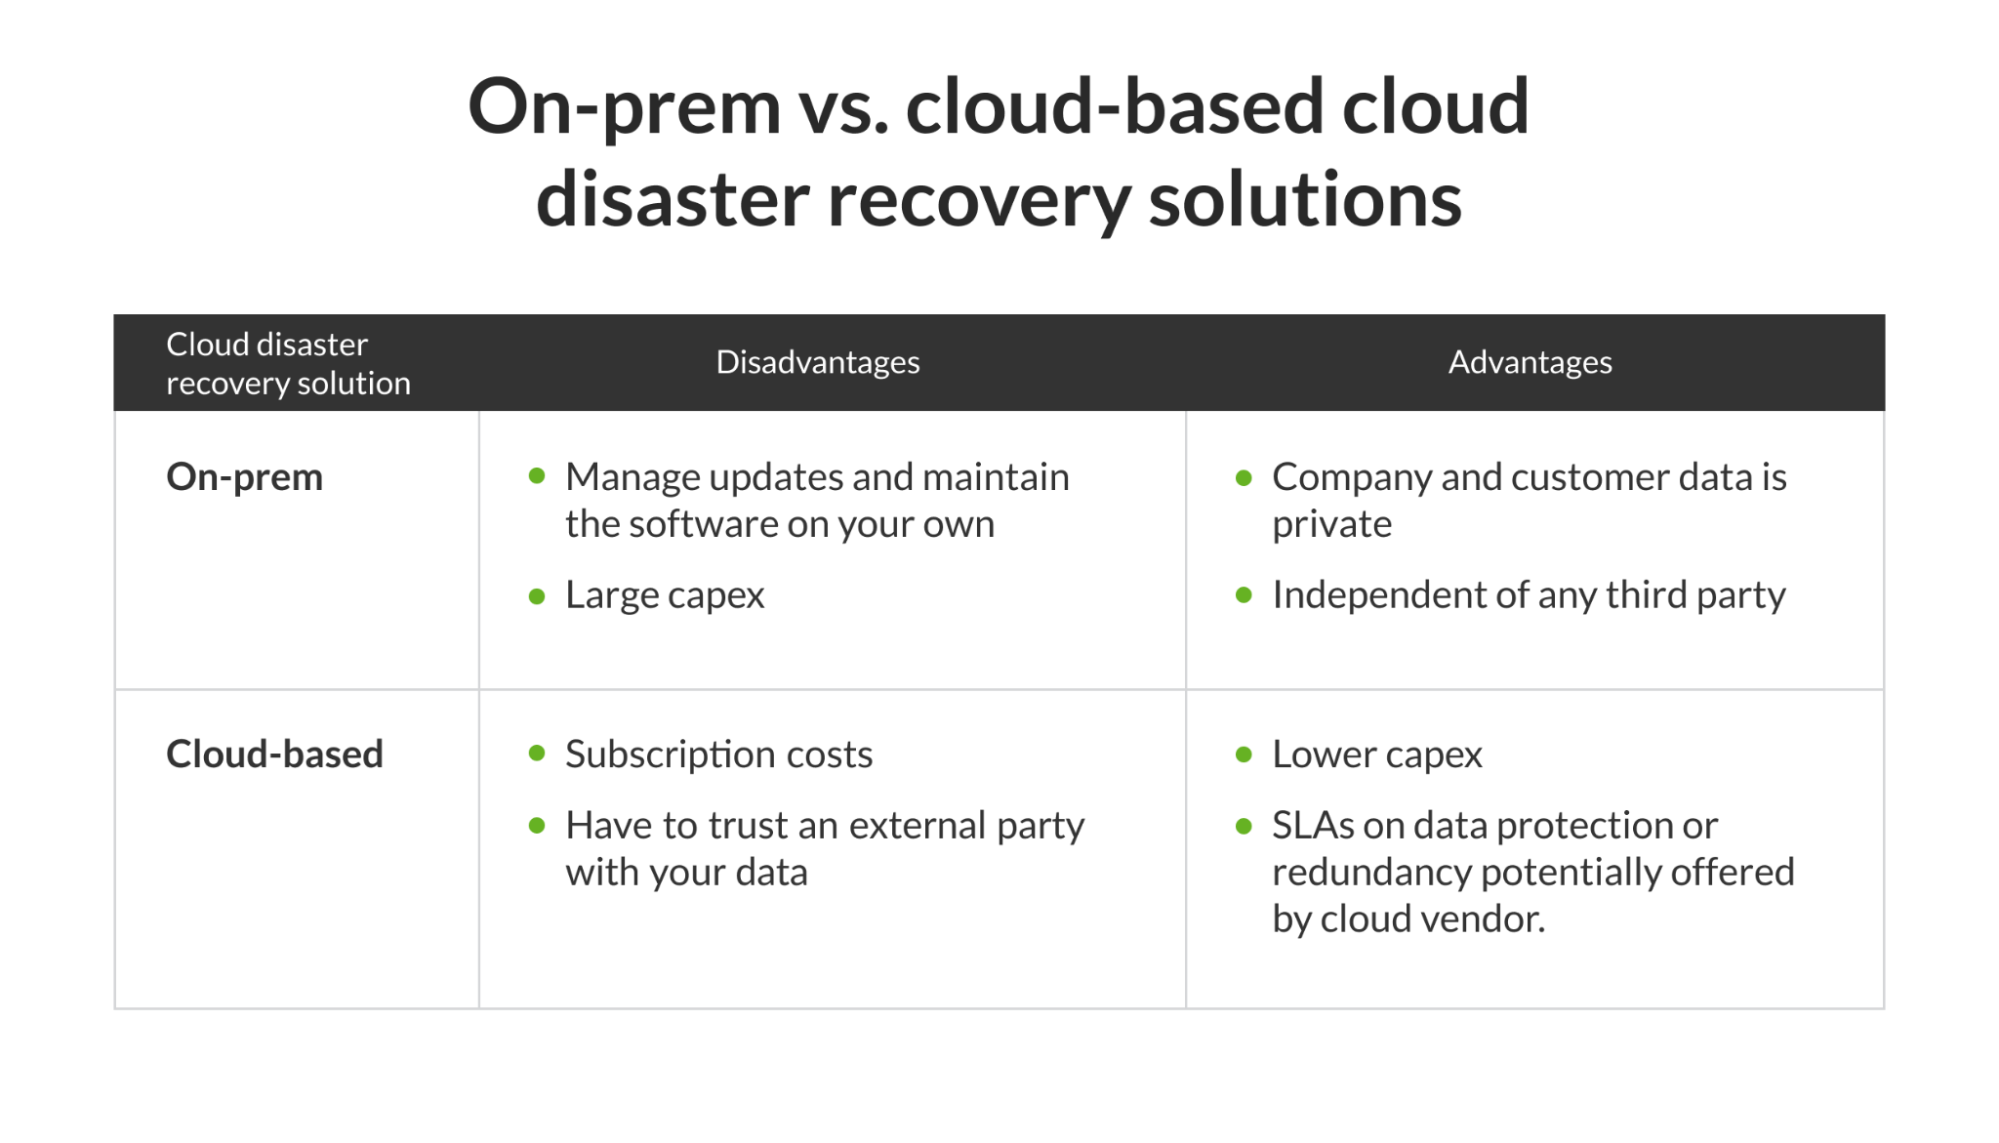 Key differences between on-prem and cloud-based cloud disaster recovery